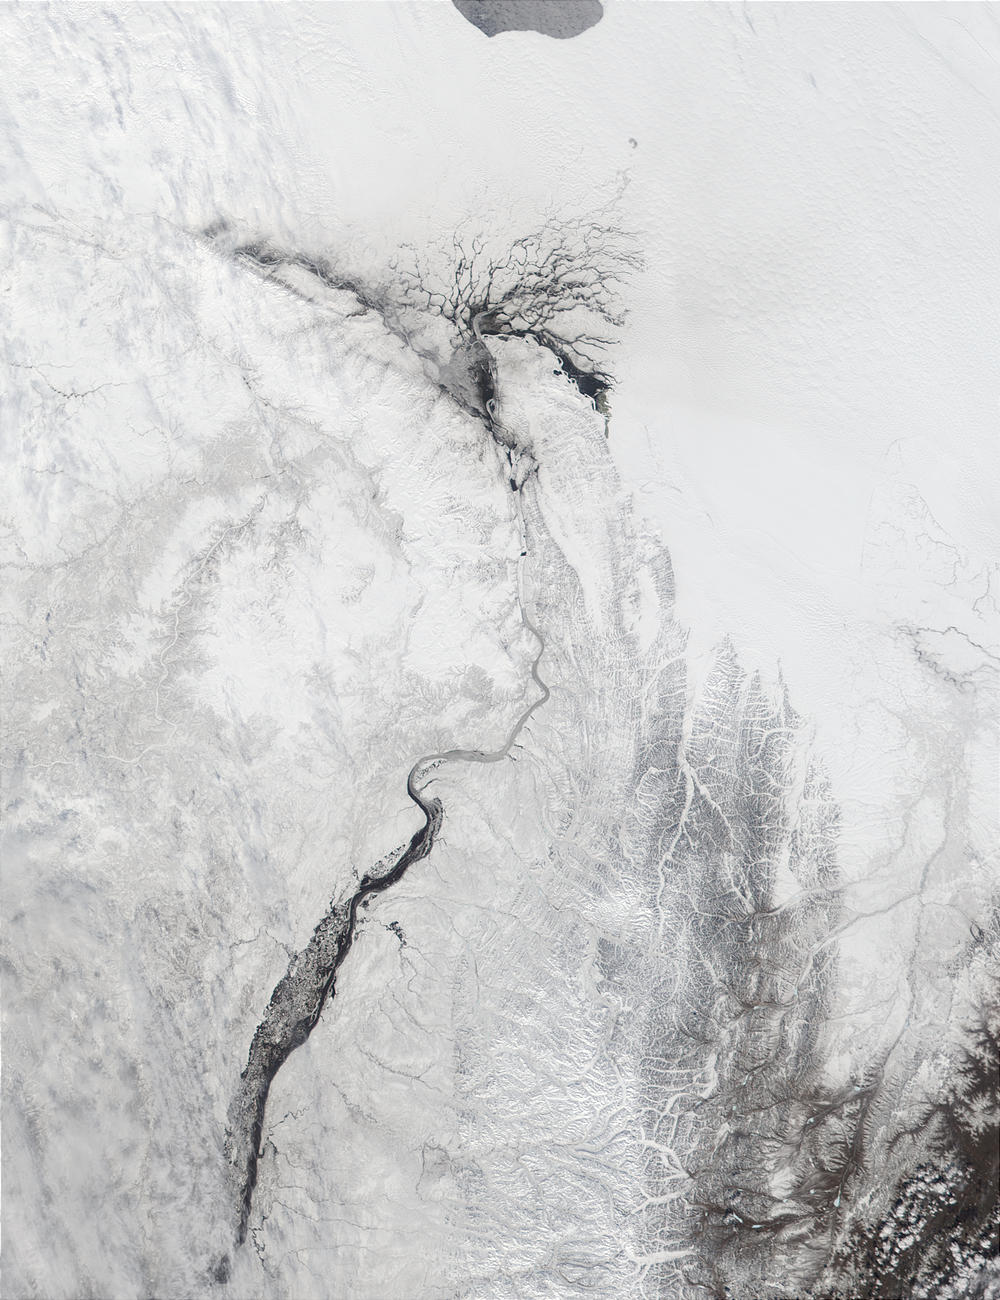 Mouth of the Lena River, Russia - related image preview